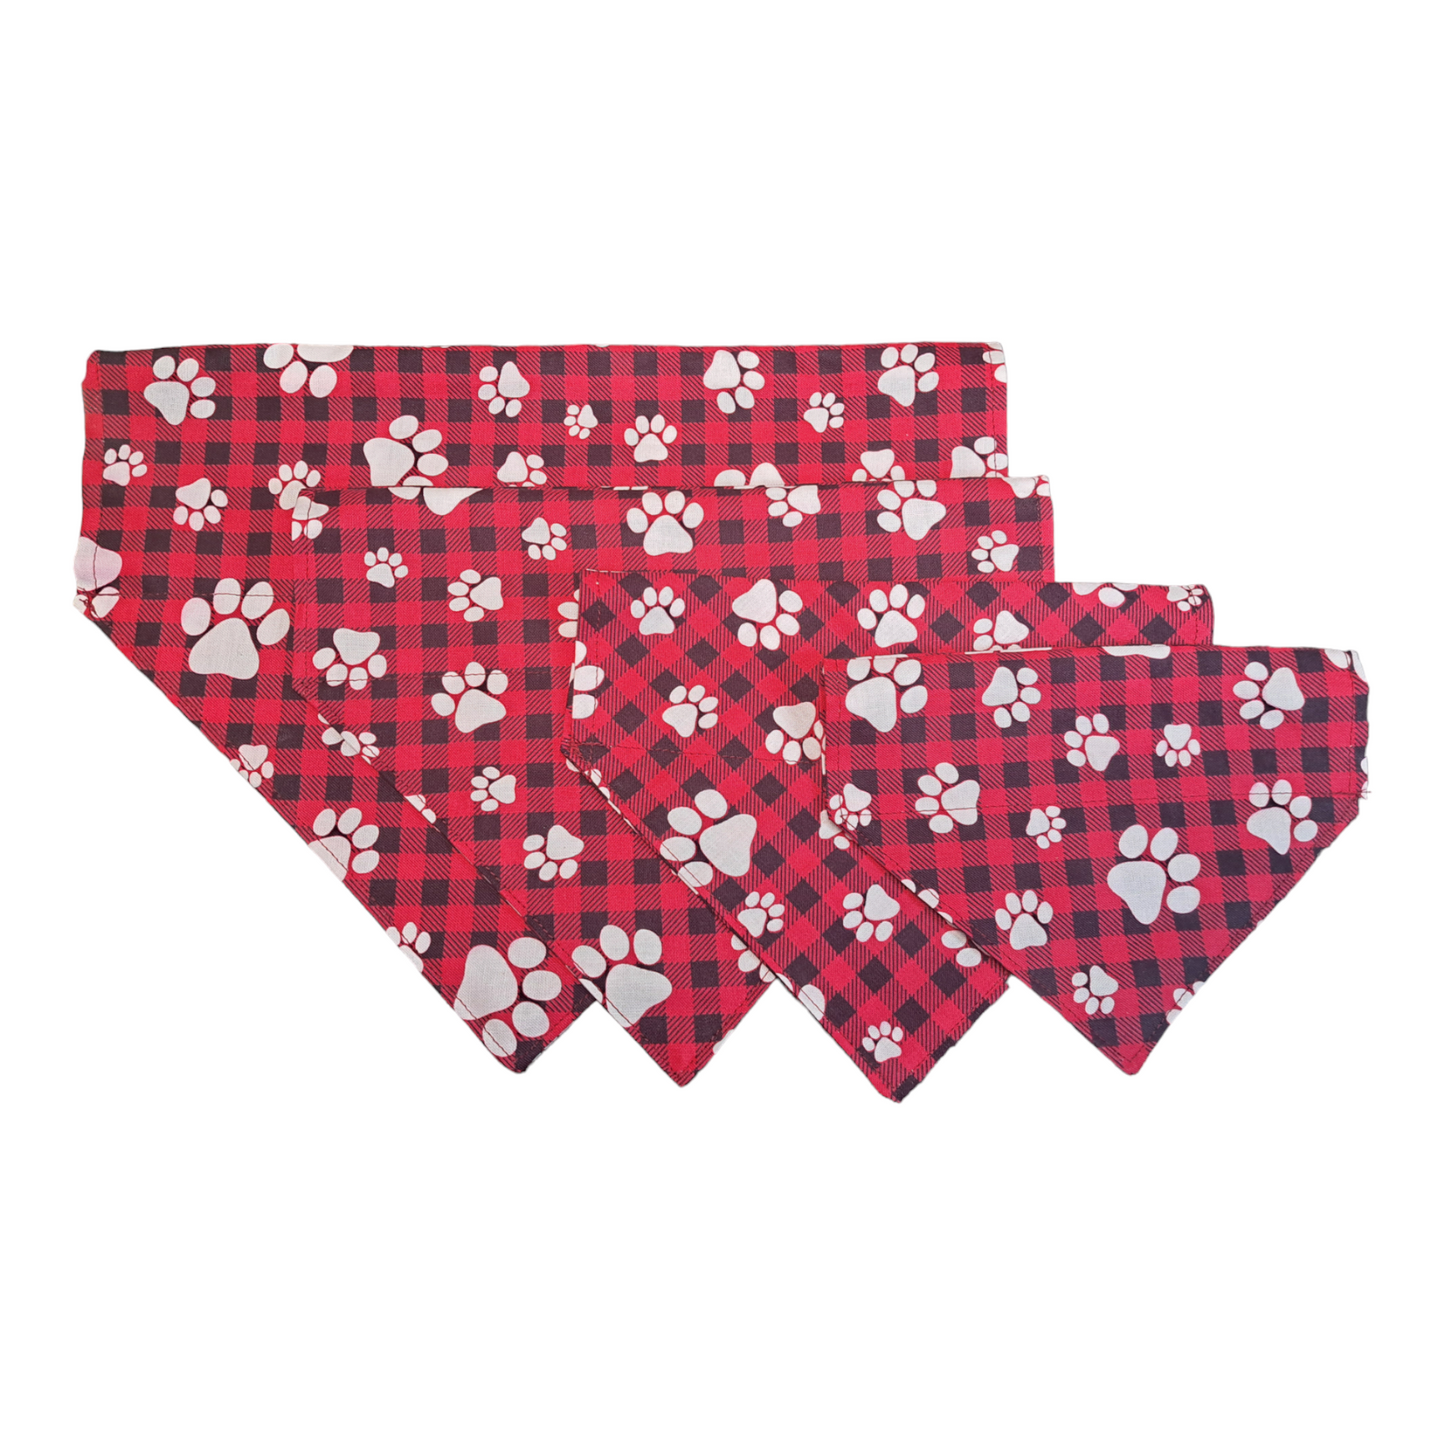 Red Plaid with Paws - Dog Bandana (Different Sizes)